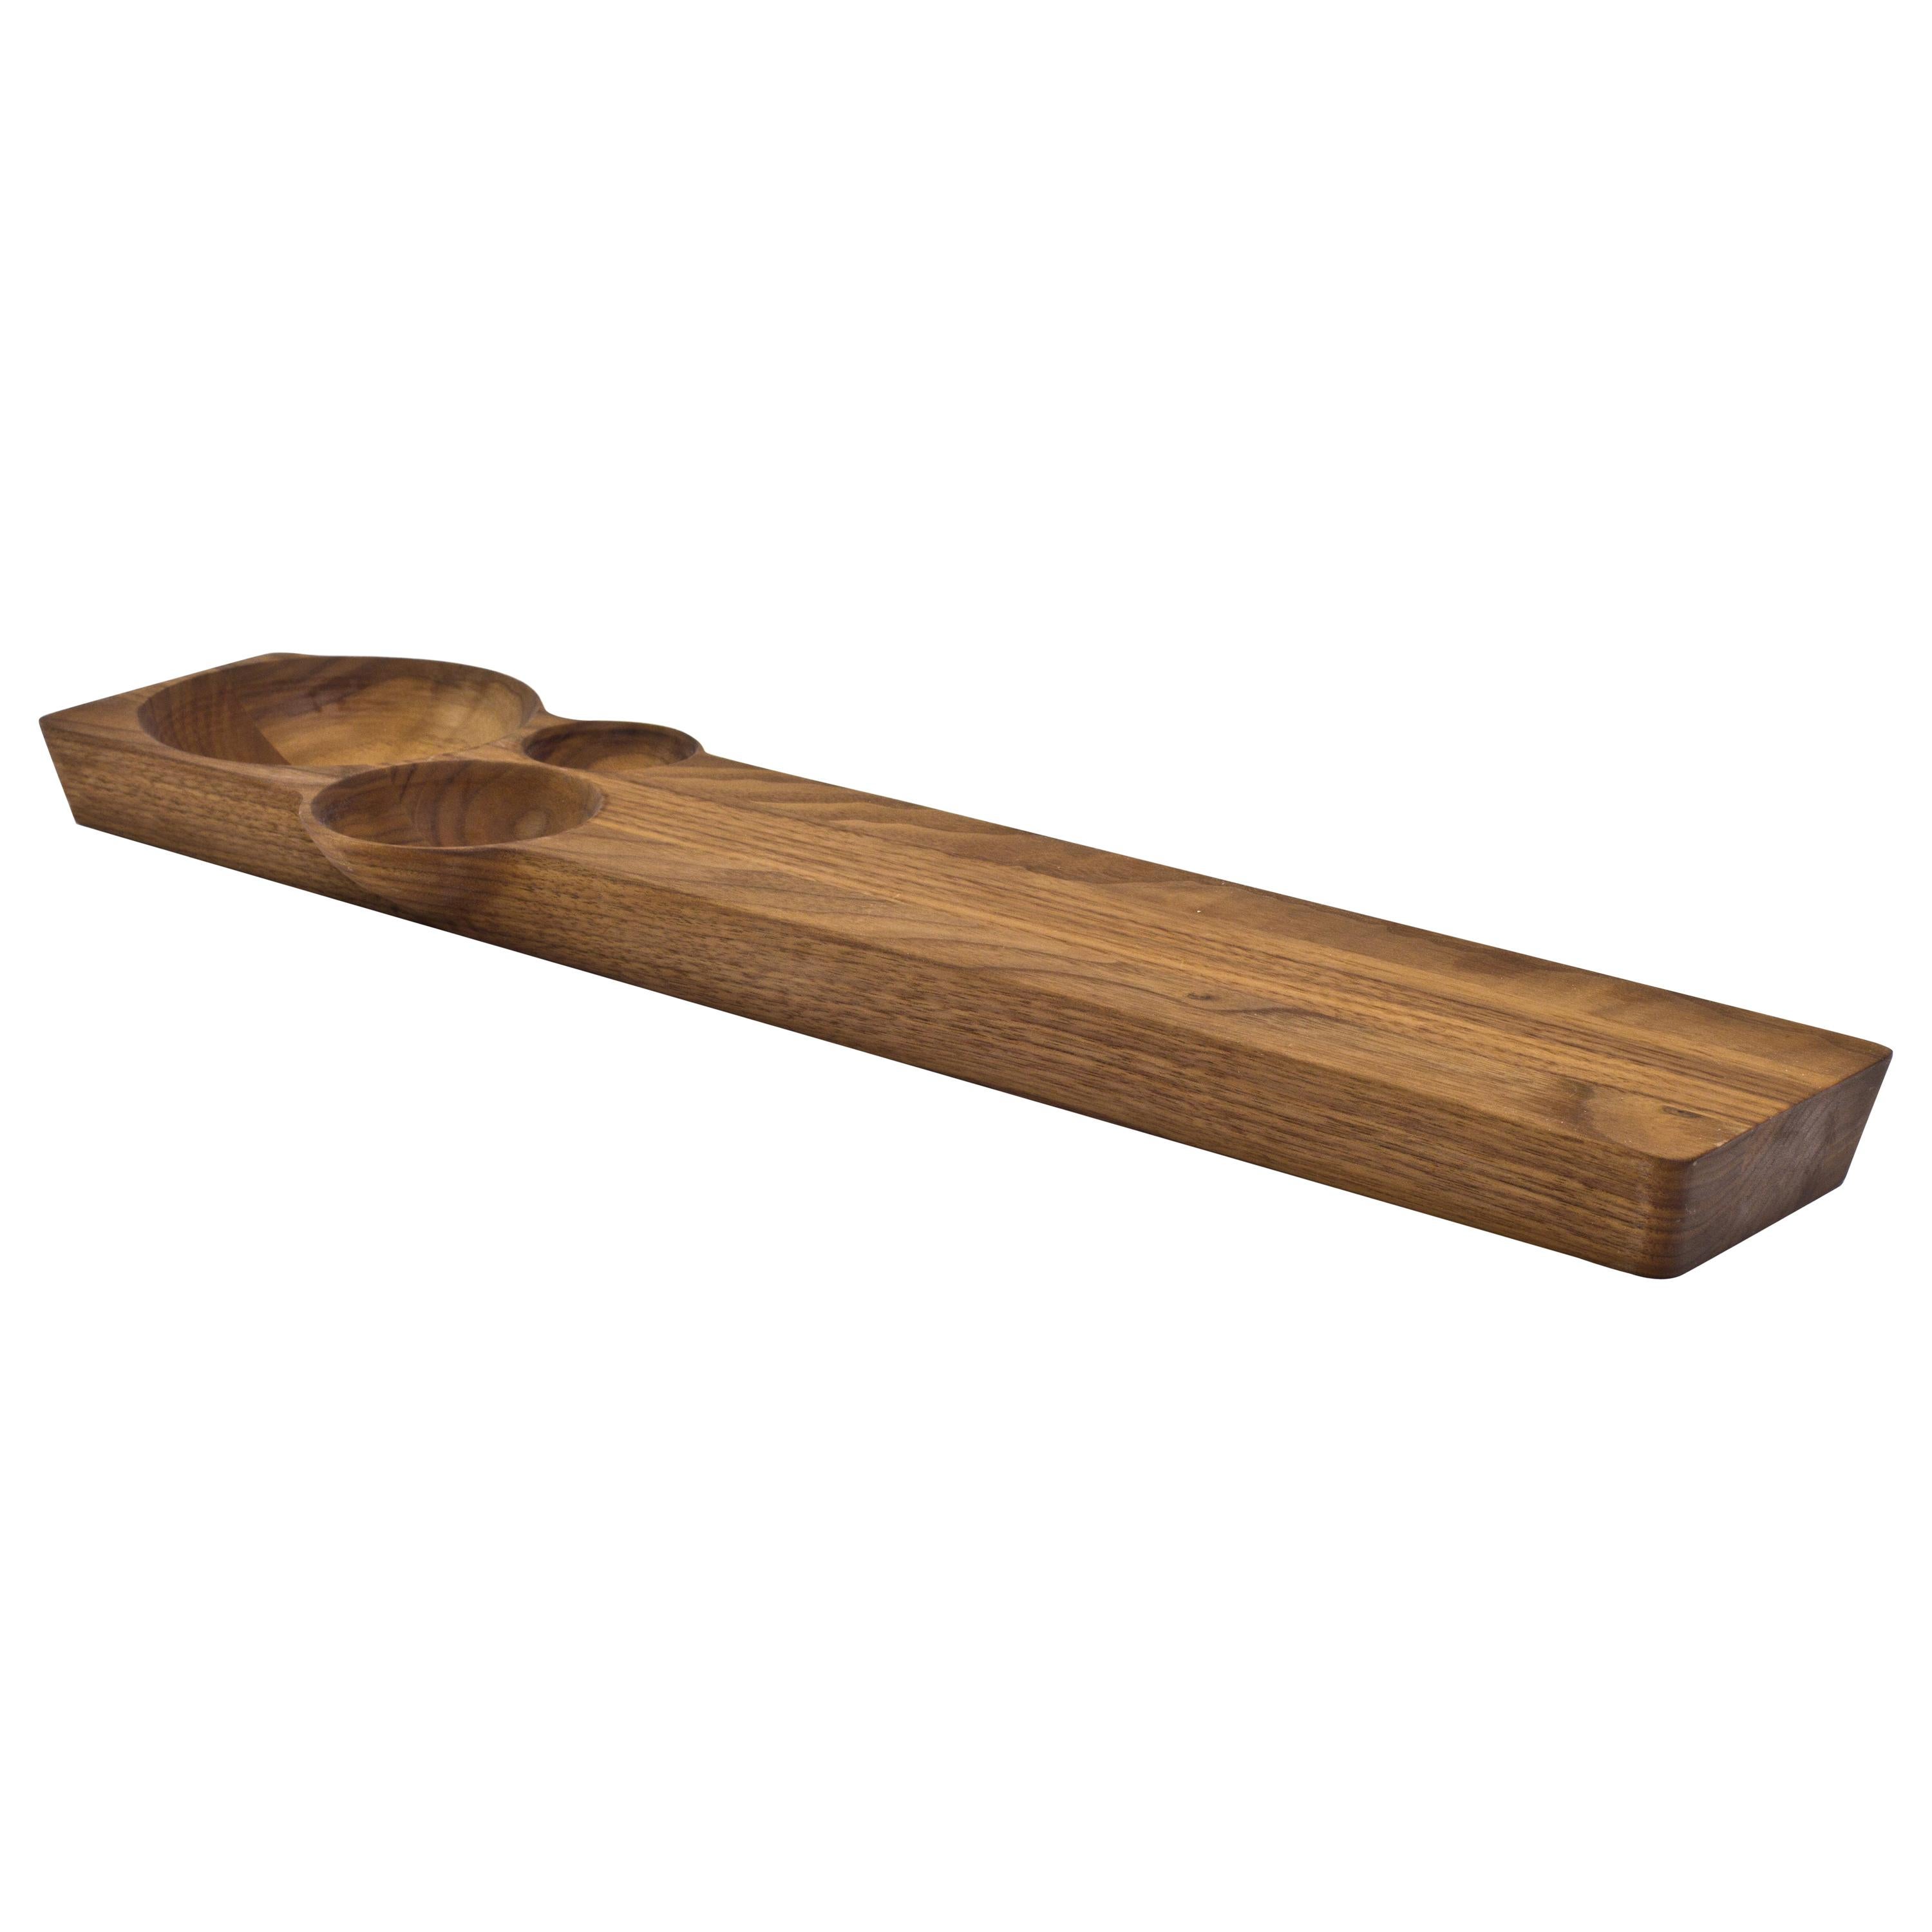 Kafi 3 Cheese Board in Oiled Walnut by Martin Leugers & Tricia Wright for Wooda